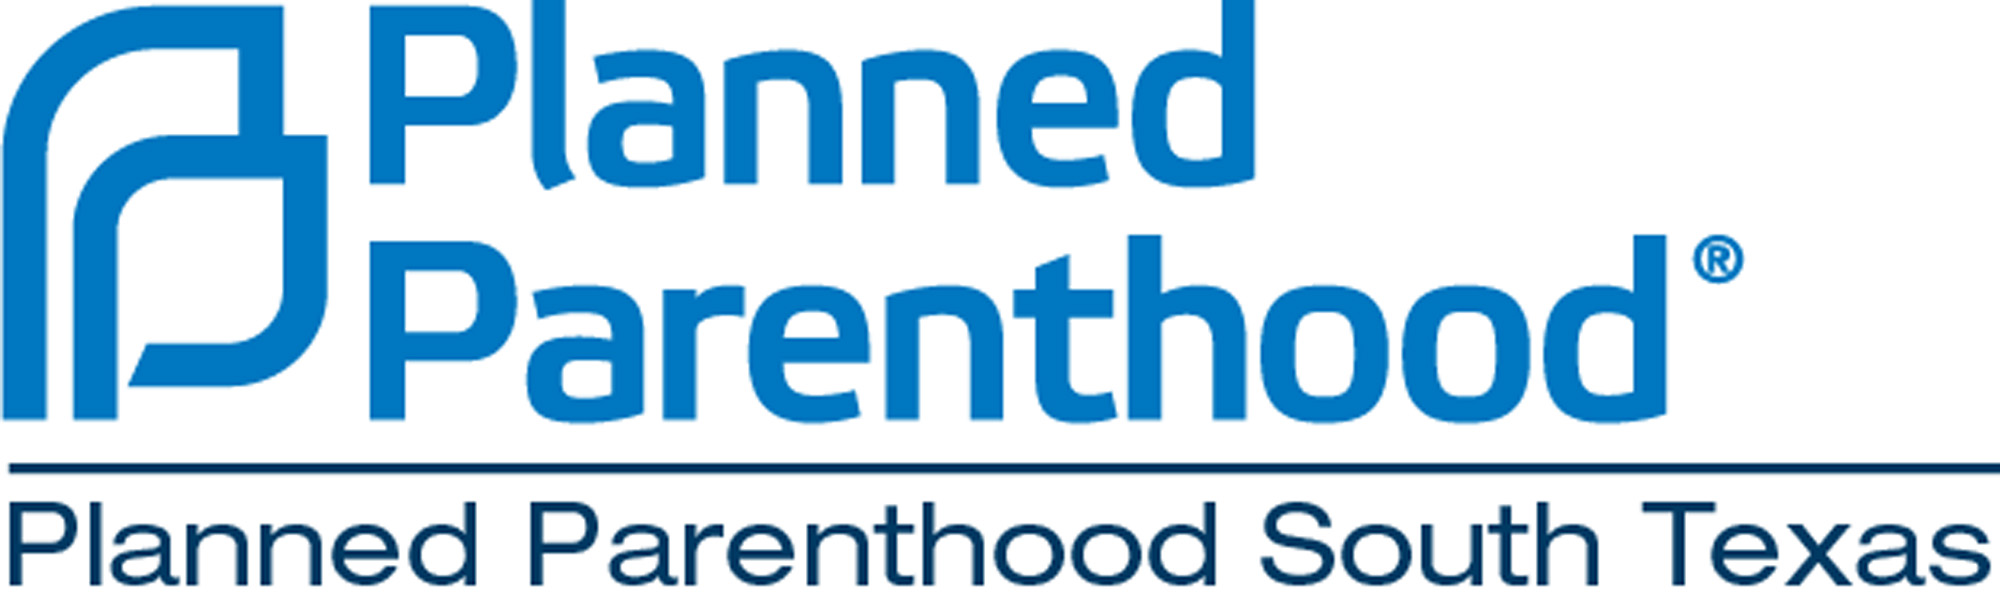 Planned_Parenthood_South_Texas